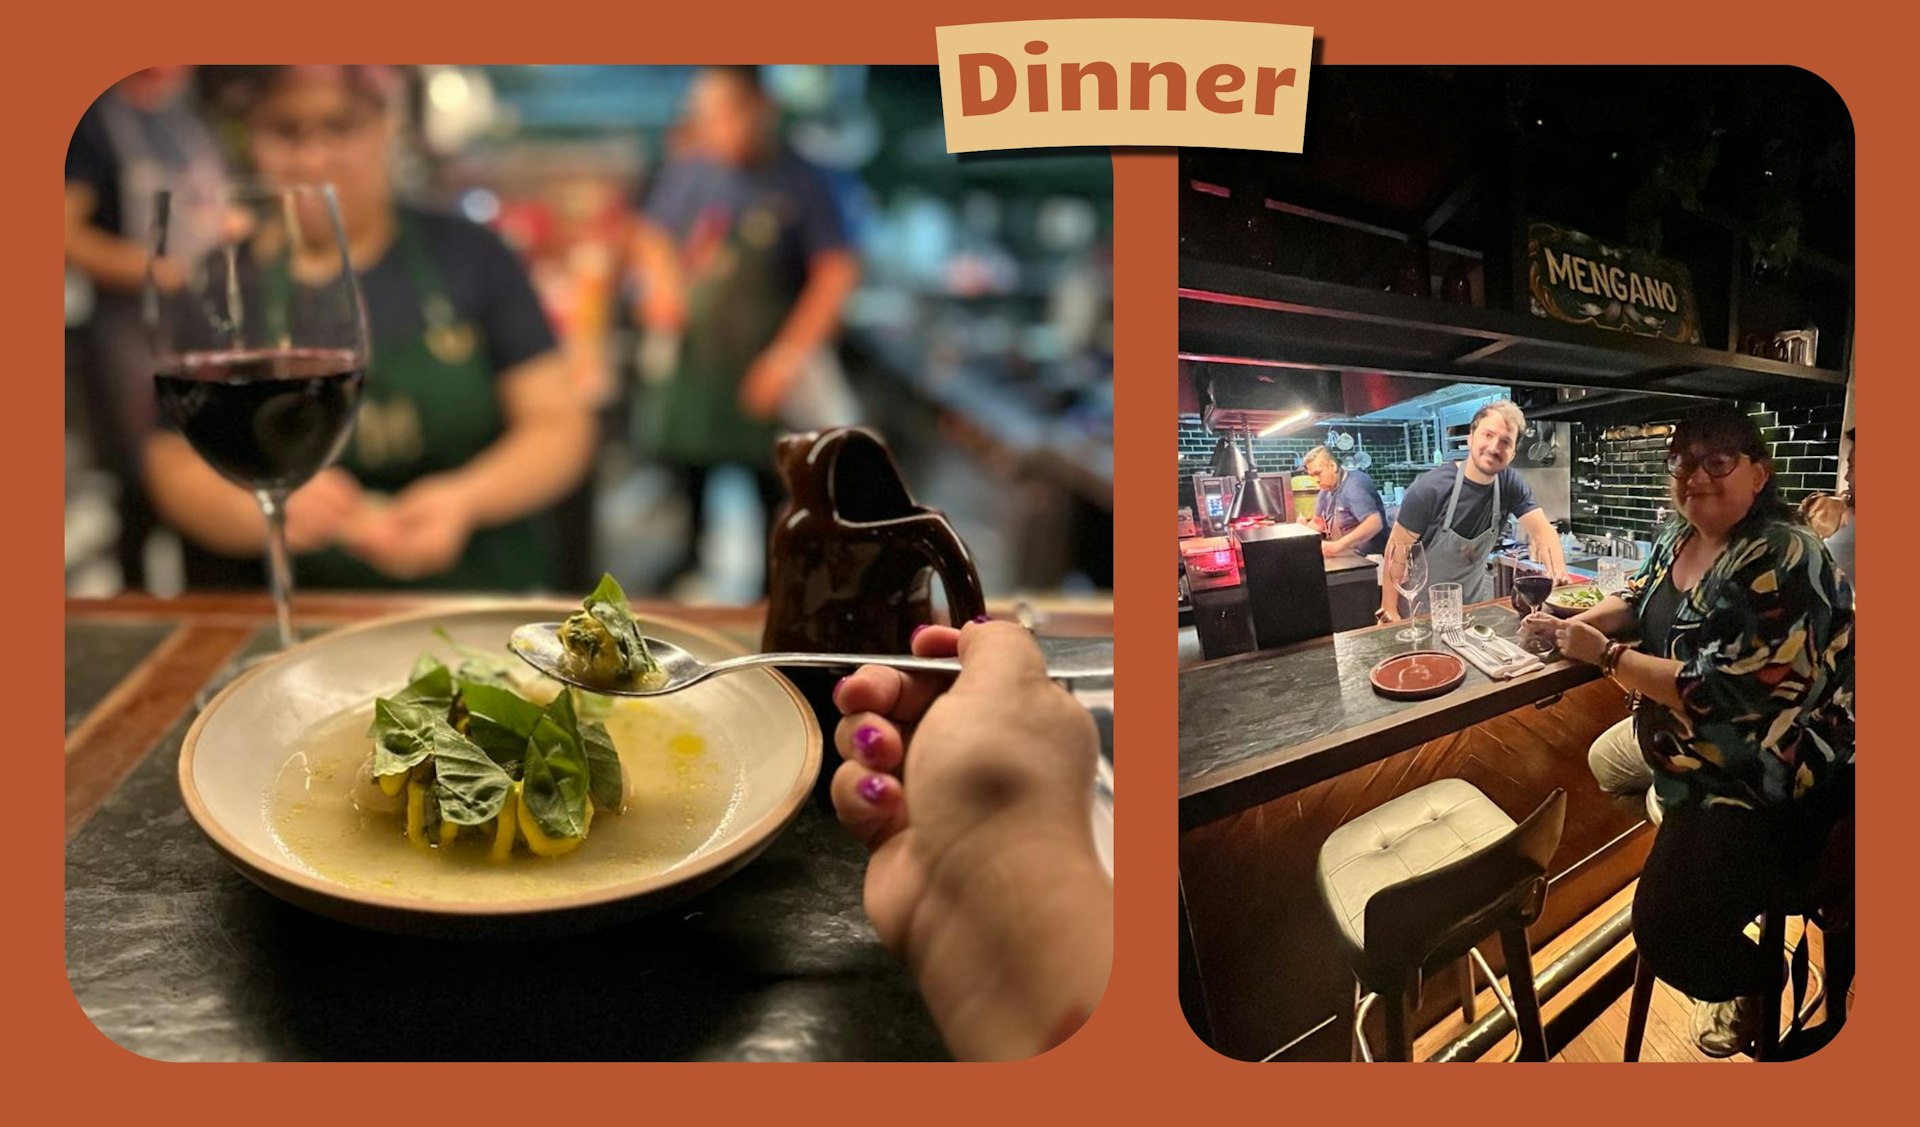 L: A diner tucks into a plate of pasta and a glass of wine in a restaurant. R: A diner poses with a chef